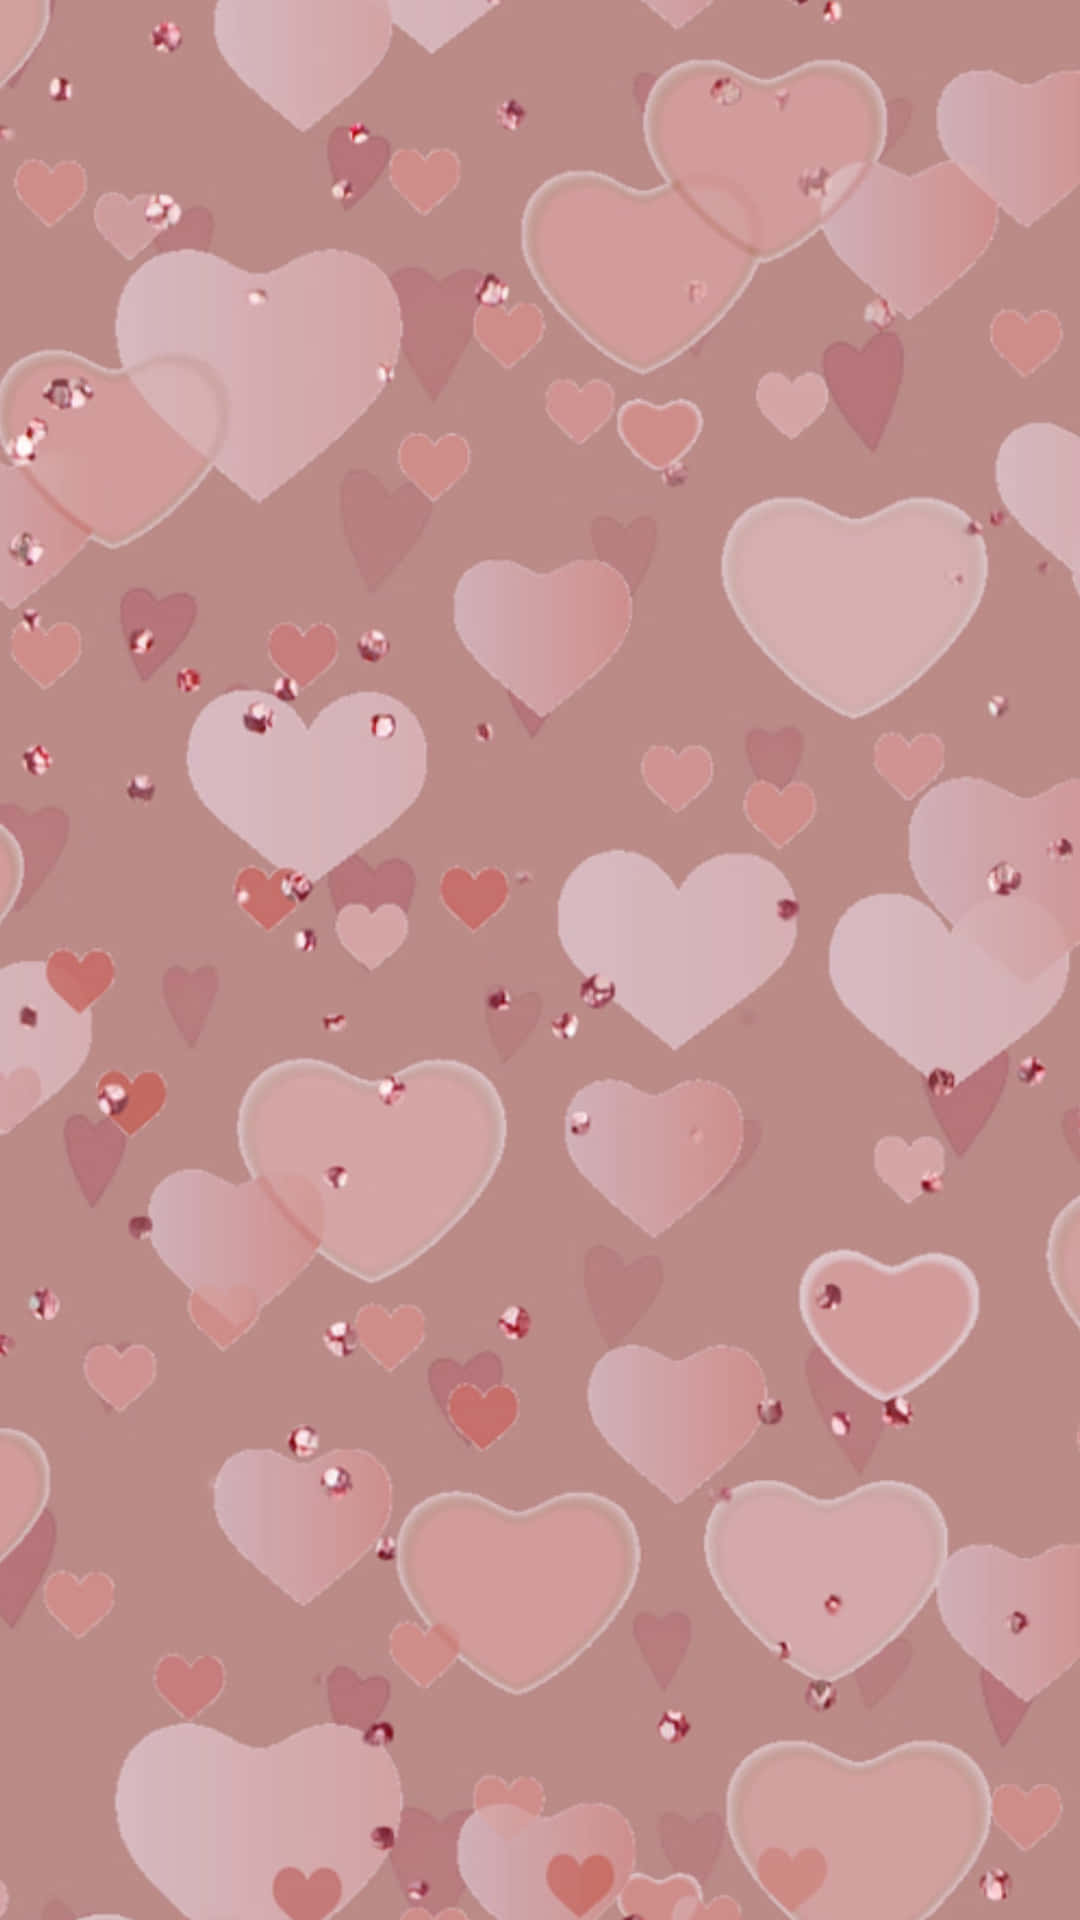 Diamonds And Pink Hearts Iphone Wallpaper